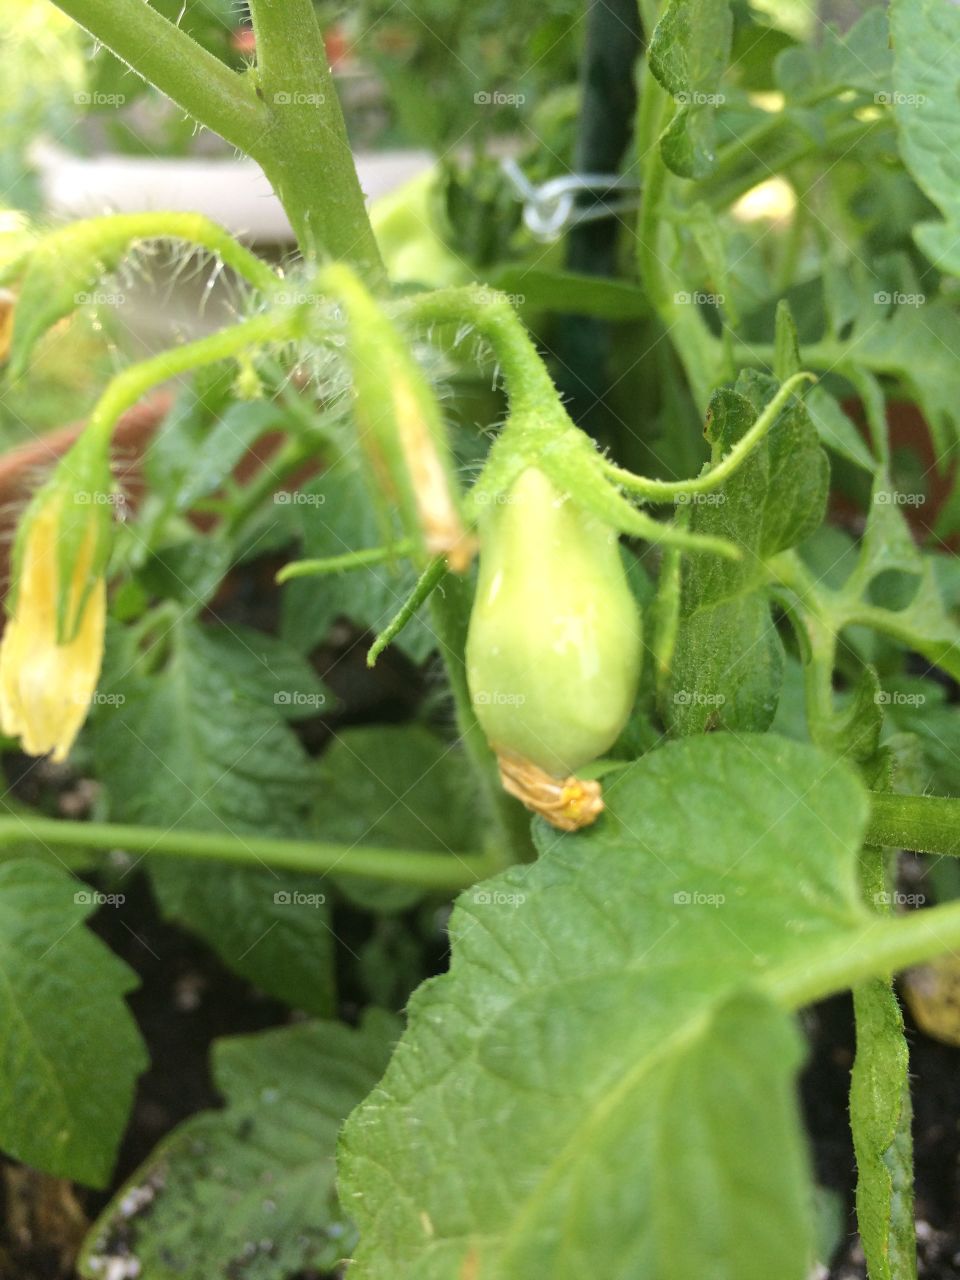 Baby tomato with the last of its flower attached.